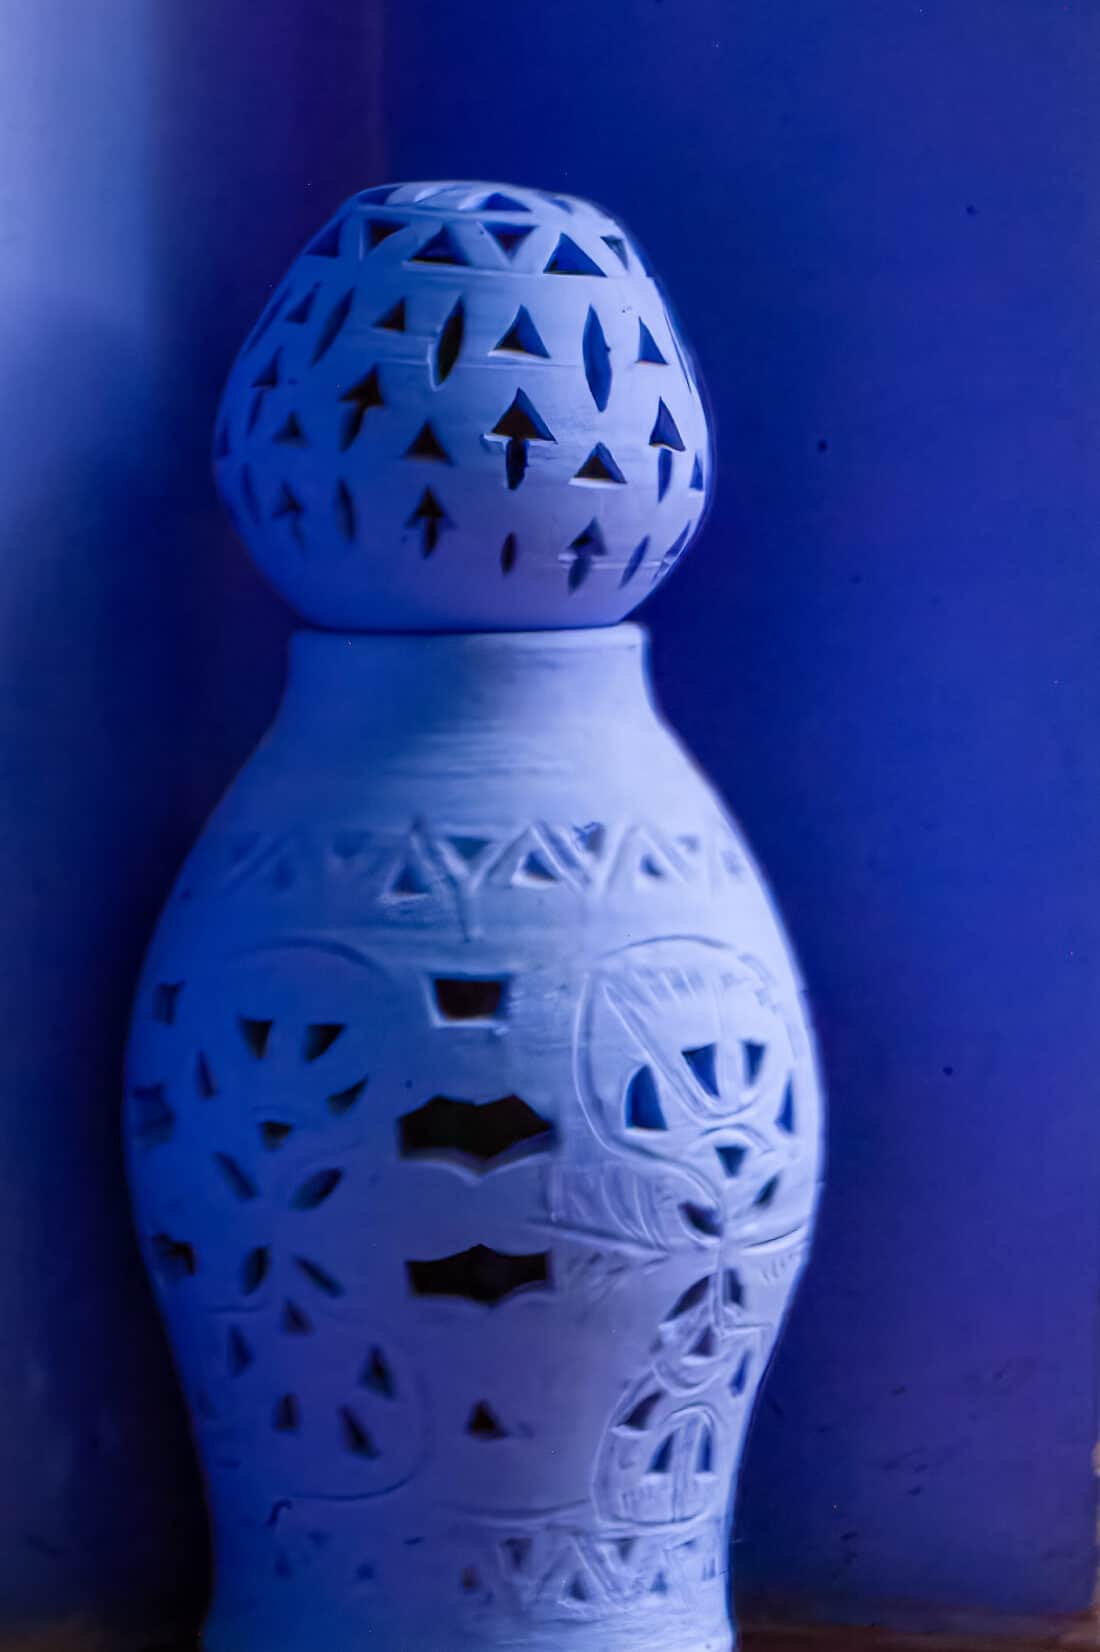 A blue ceramic vase with intricate cut-out patterns against a Majorelle Garden-inspired background.